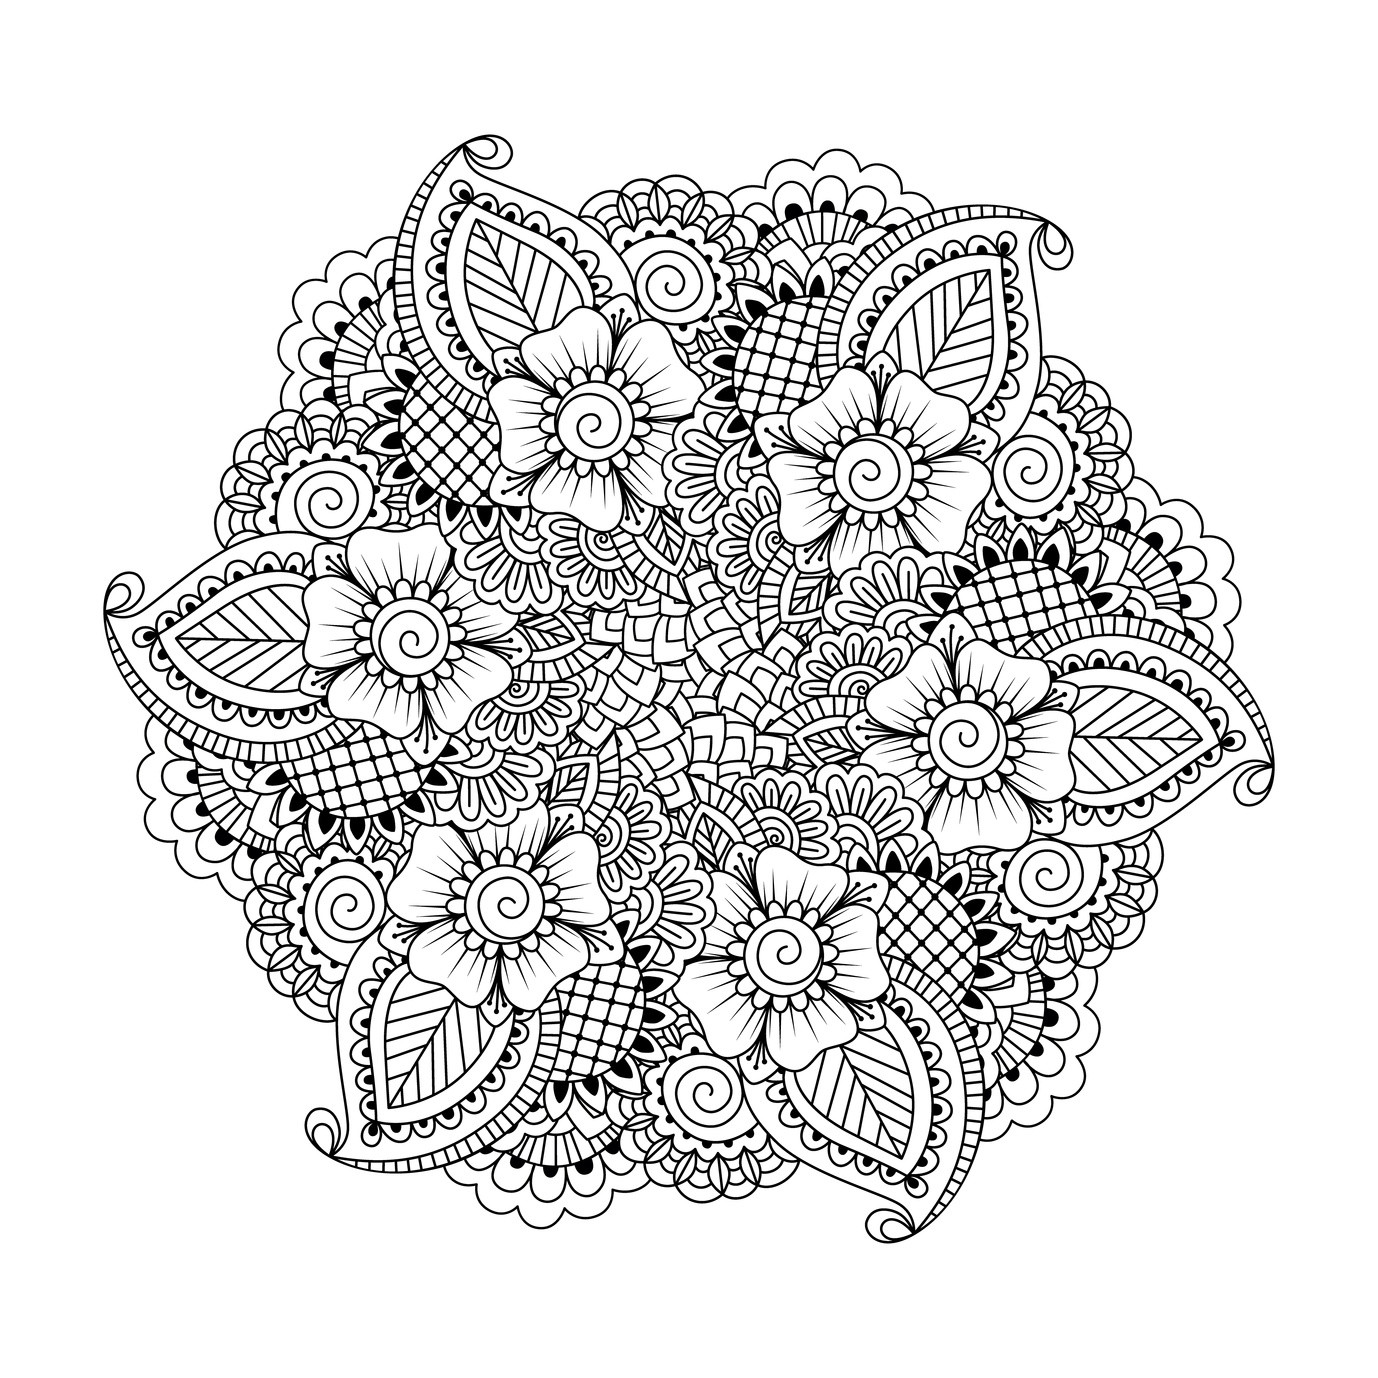 Coloring Pages For Adults Mandala
 63 Adult Coloring Pages To Nourish Your Mental Visual